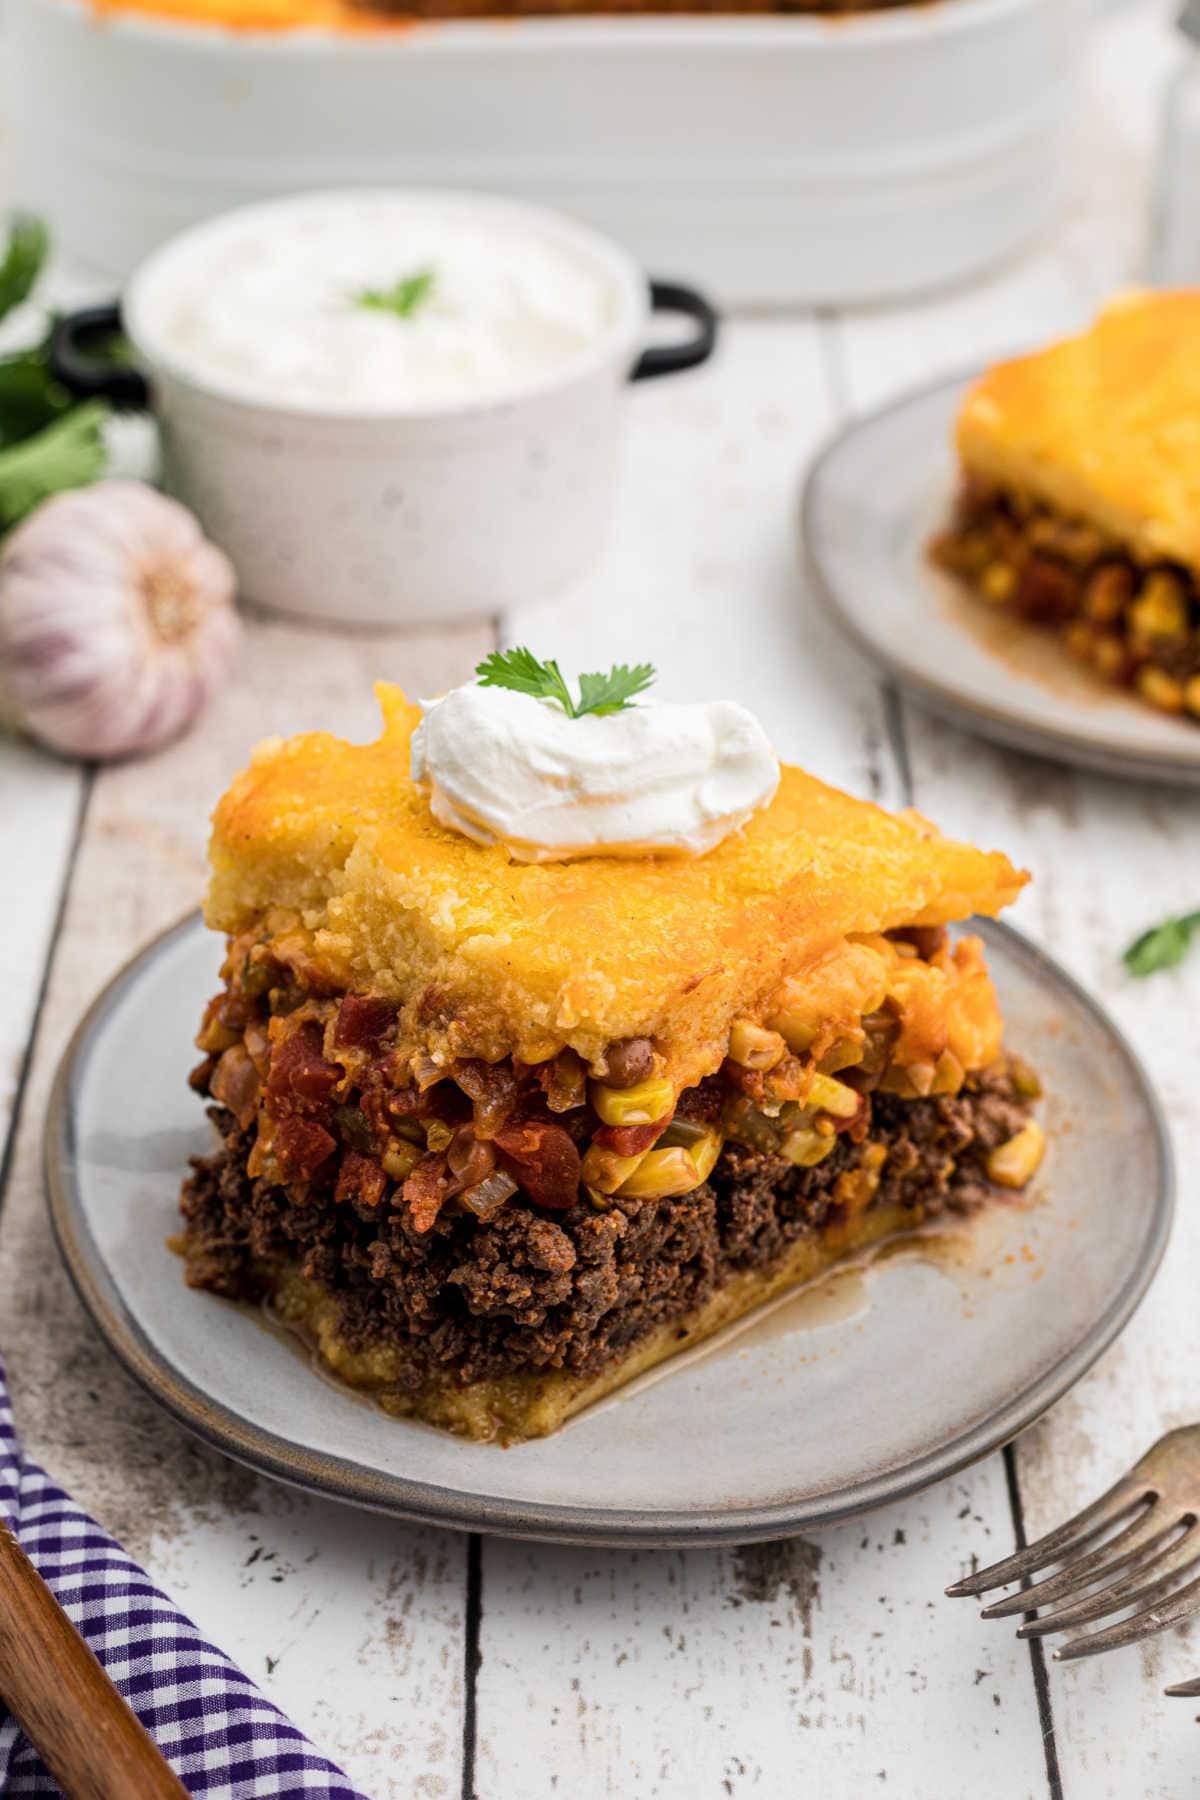 A serving of tamale pie on a plate.